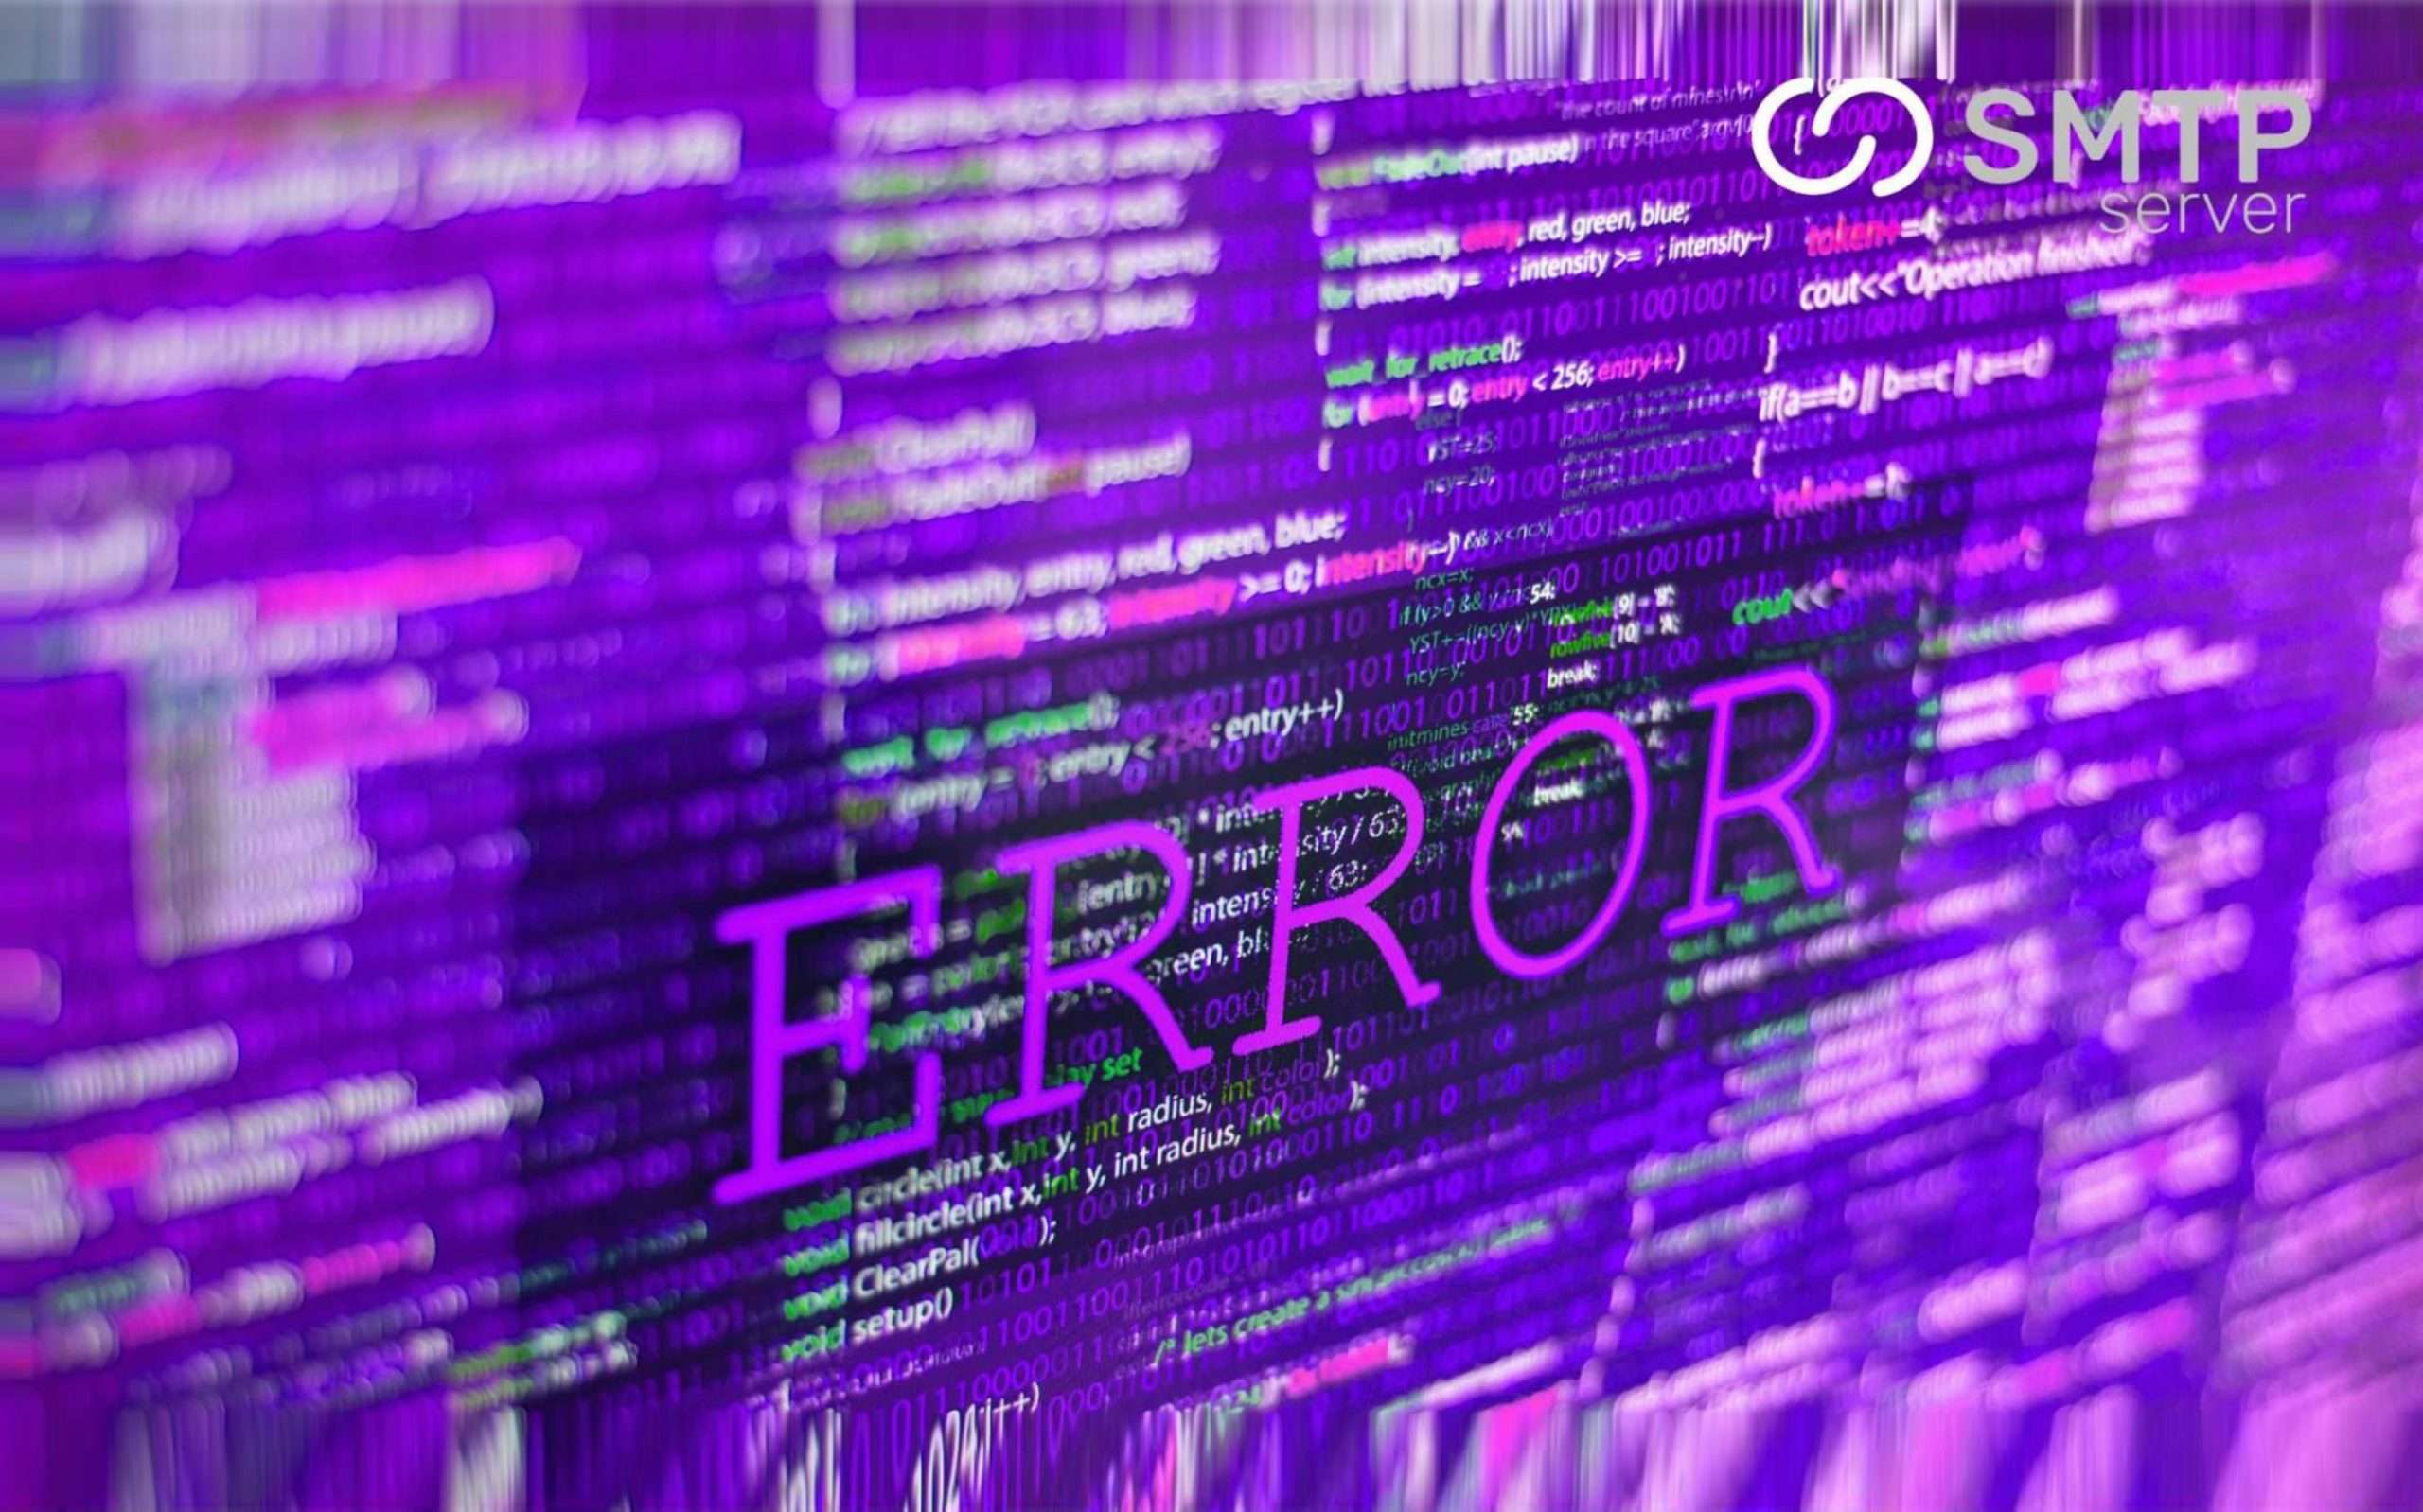 SMTP Server Error Codes: What They Mean and How to Fix Them